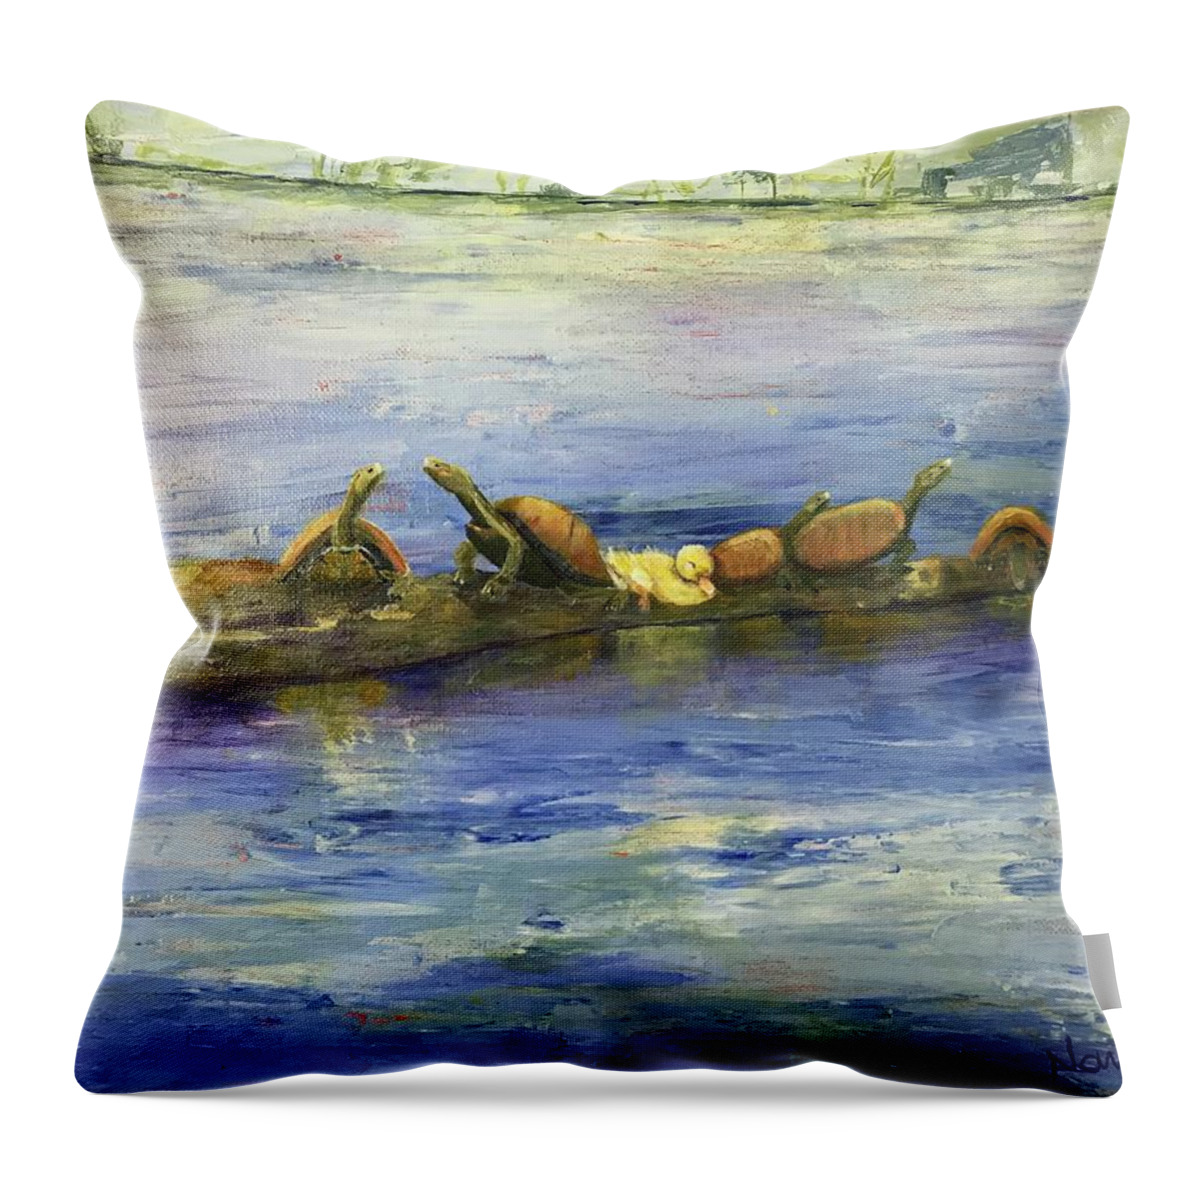 Turtles Throw Pillow featuring the painting Odd Duck by Deborah Naves